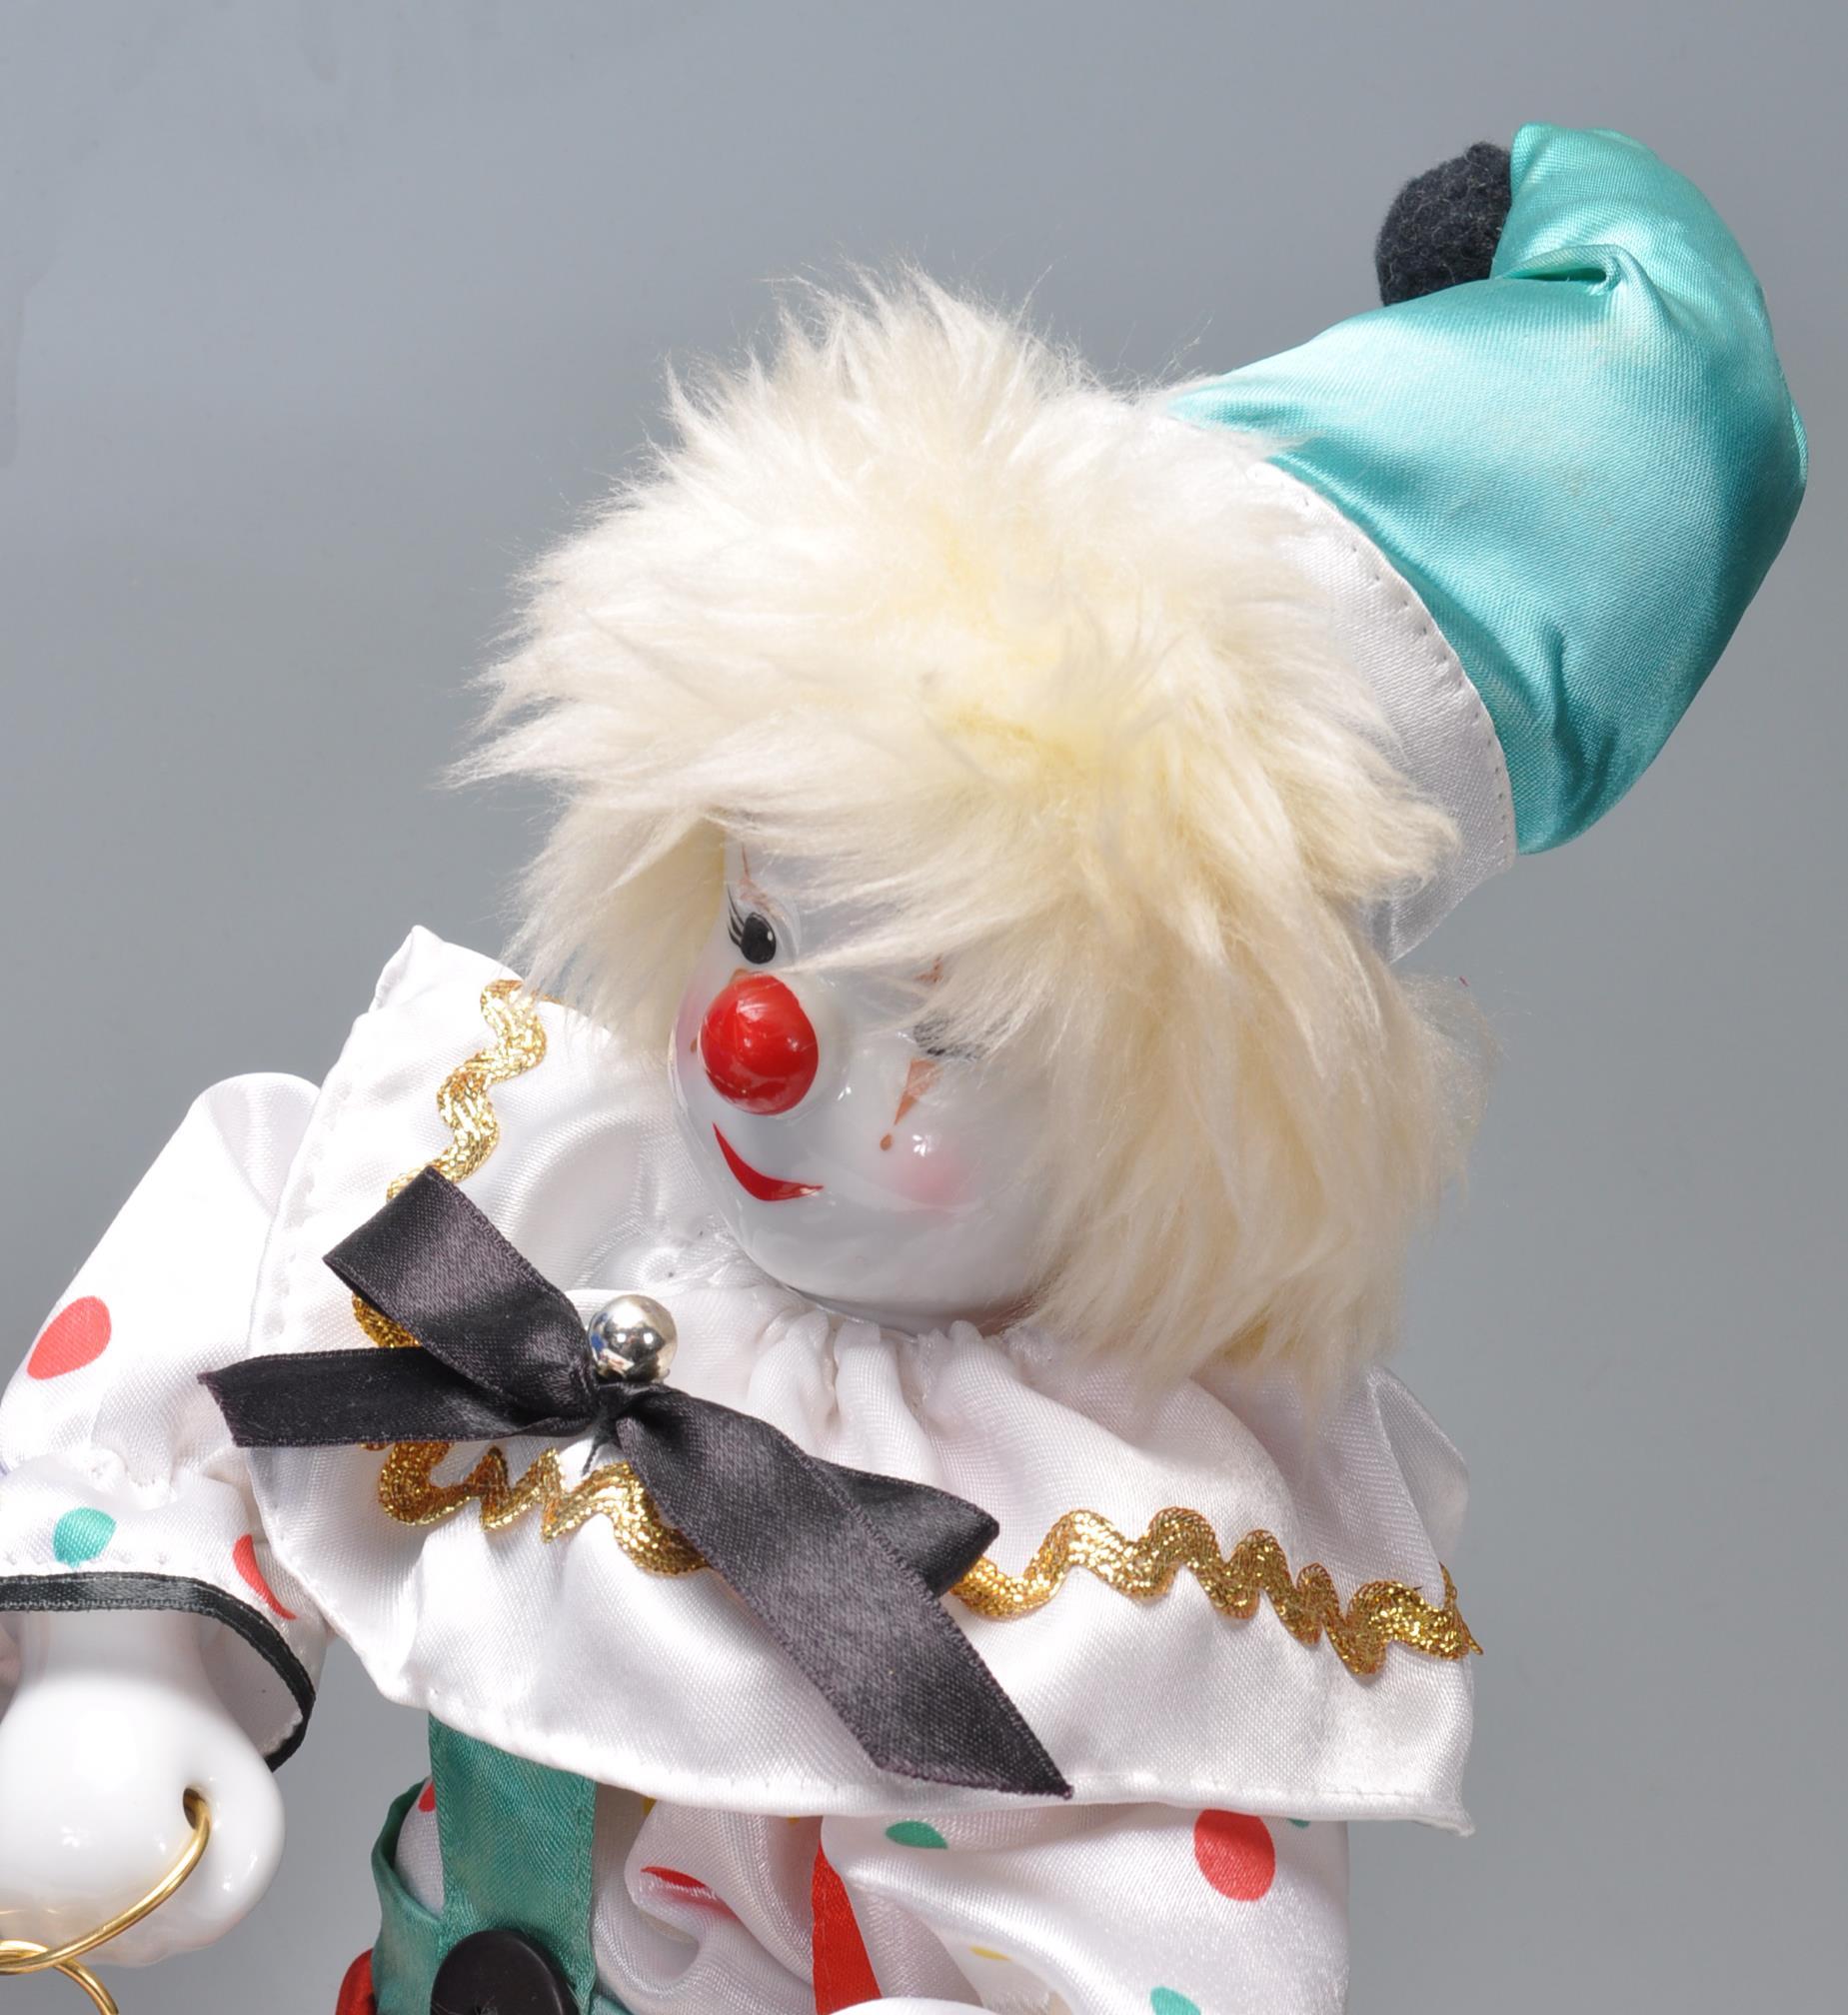 LARGE COLLECTION OF CLOWN FIGURINES WITH PORCELAIN FACES - Image 5 of 9